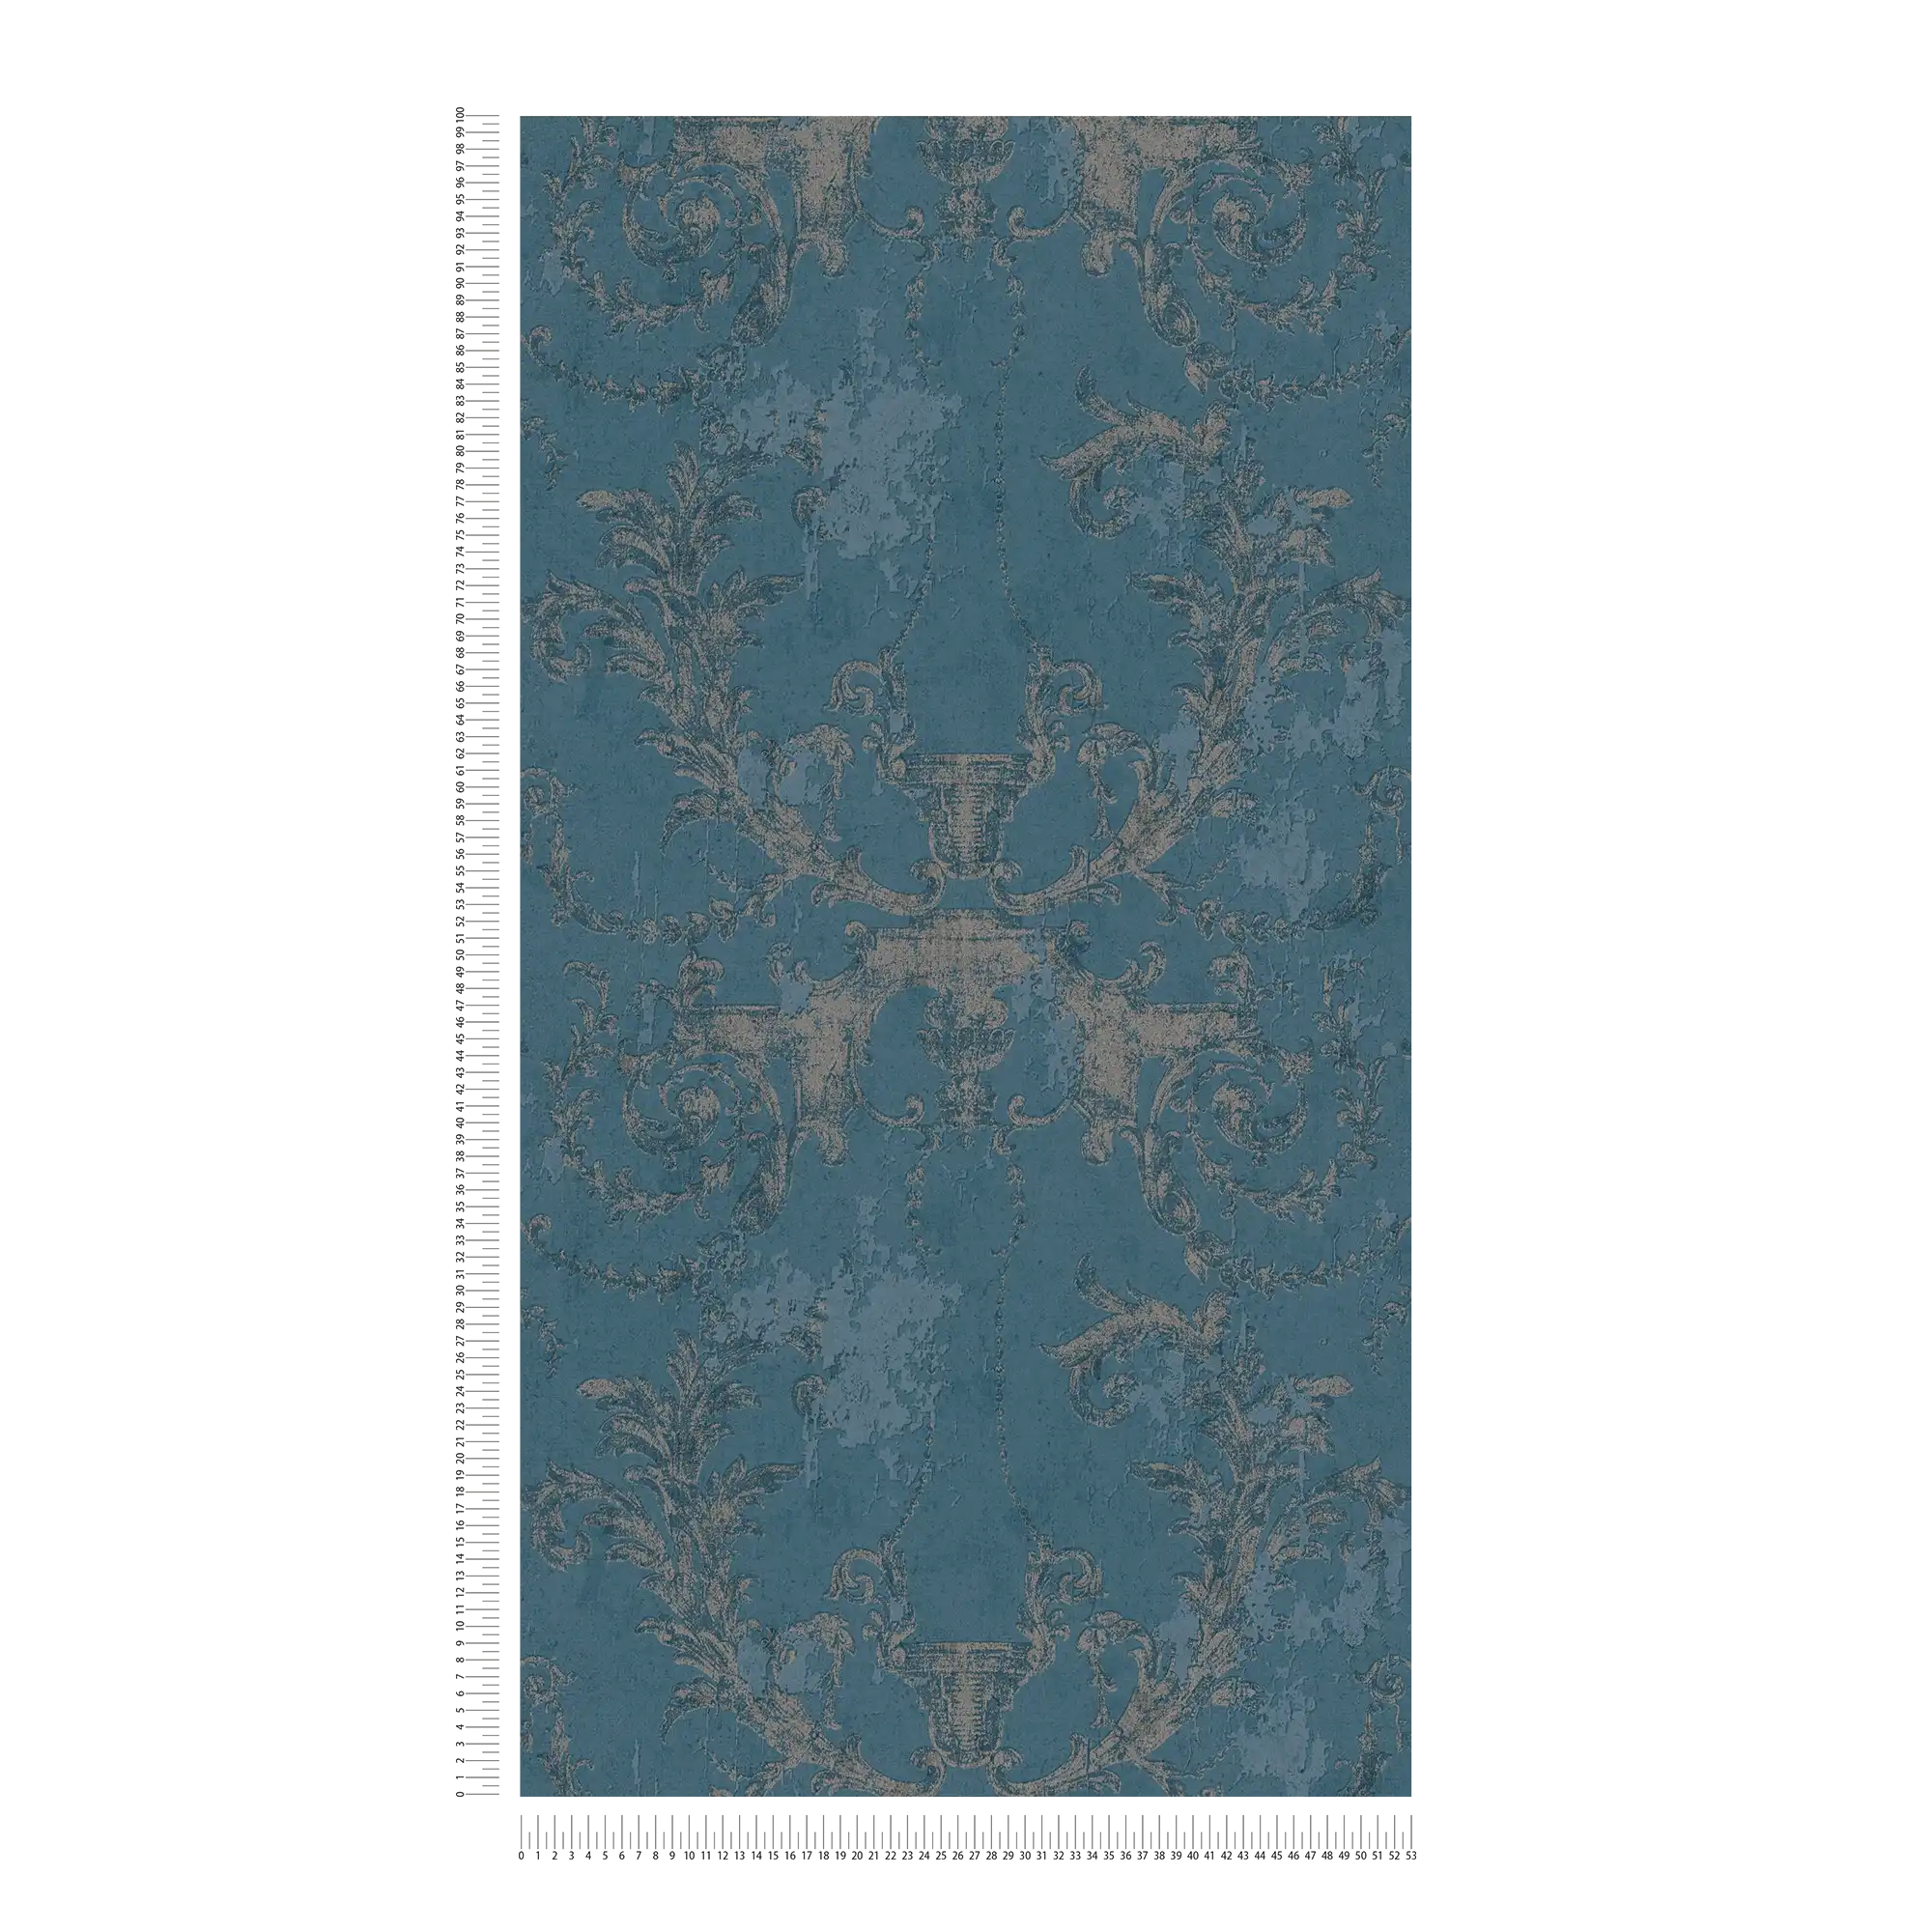             Ornament wallpaper vintage style & rustic - blue, silver
        